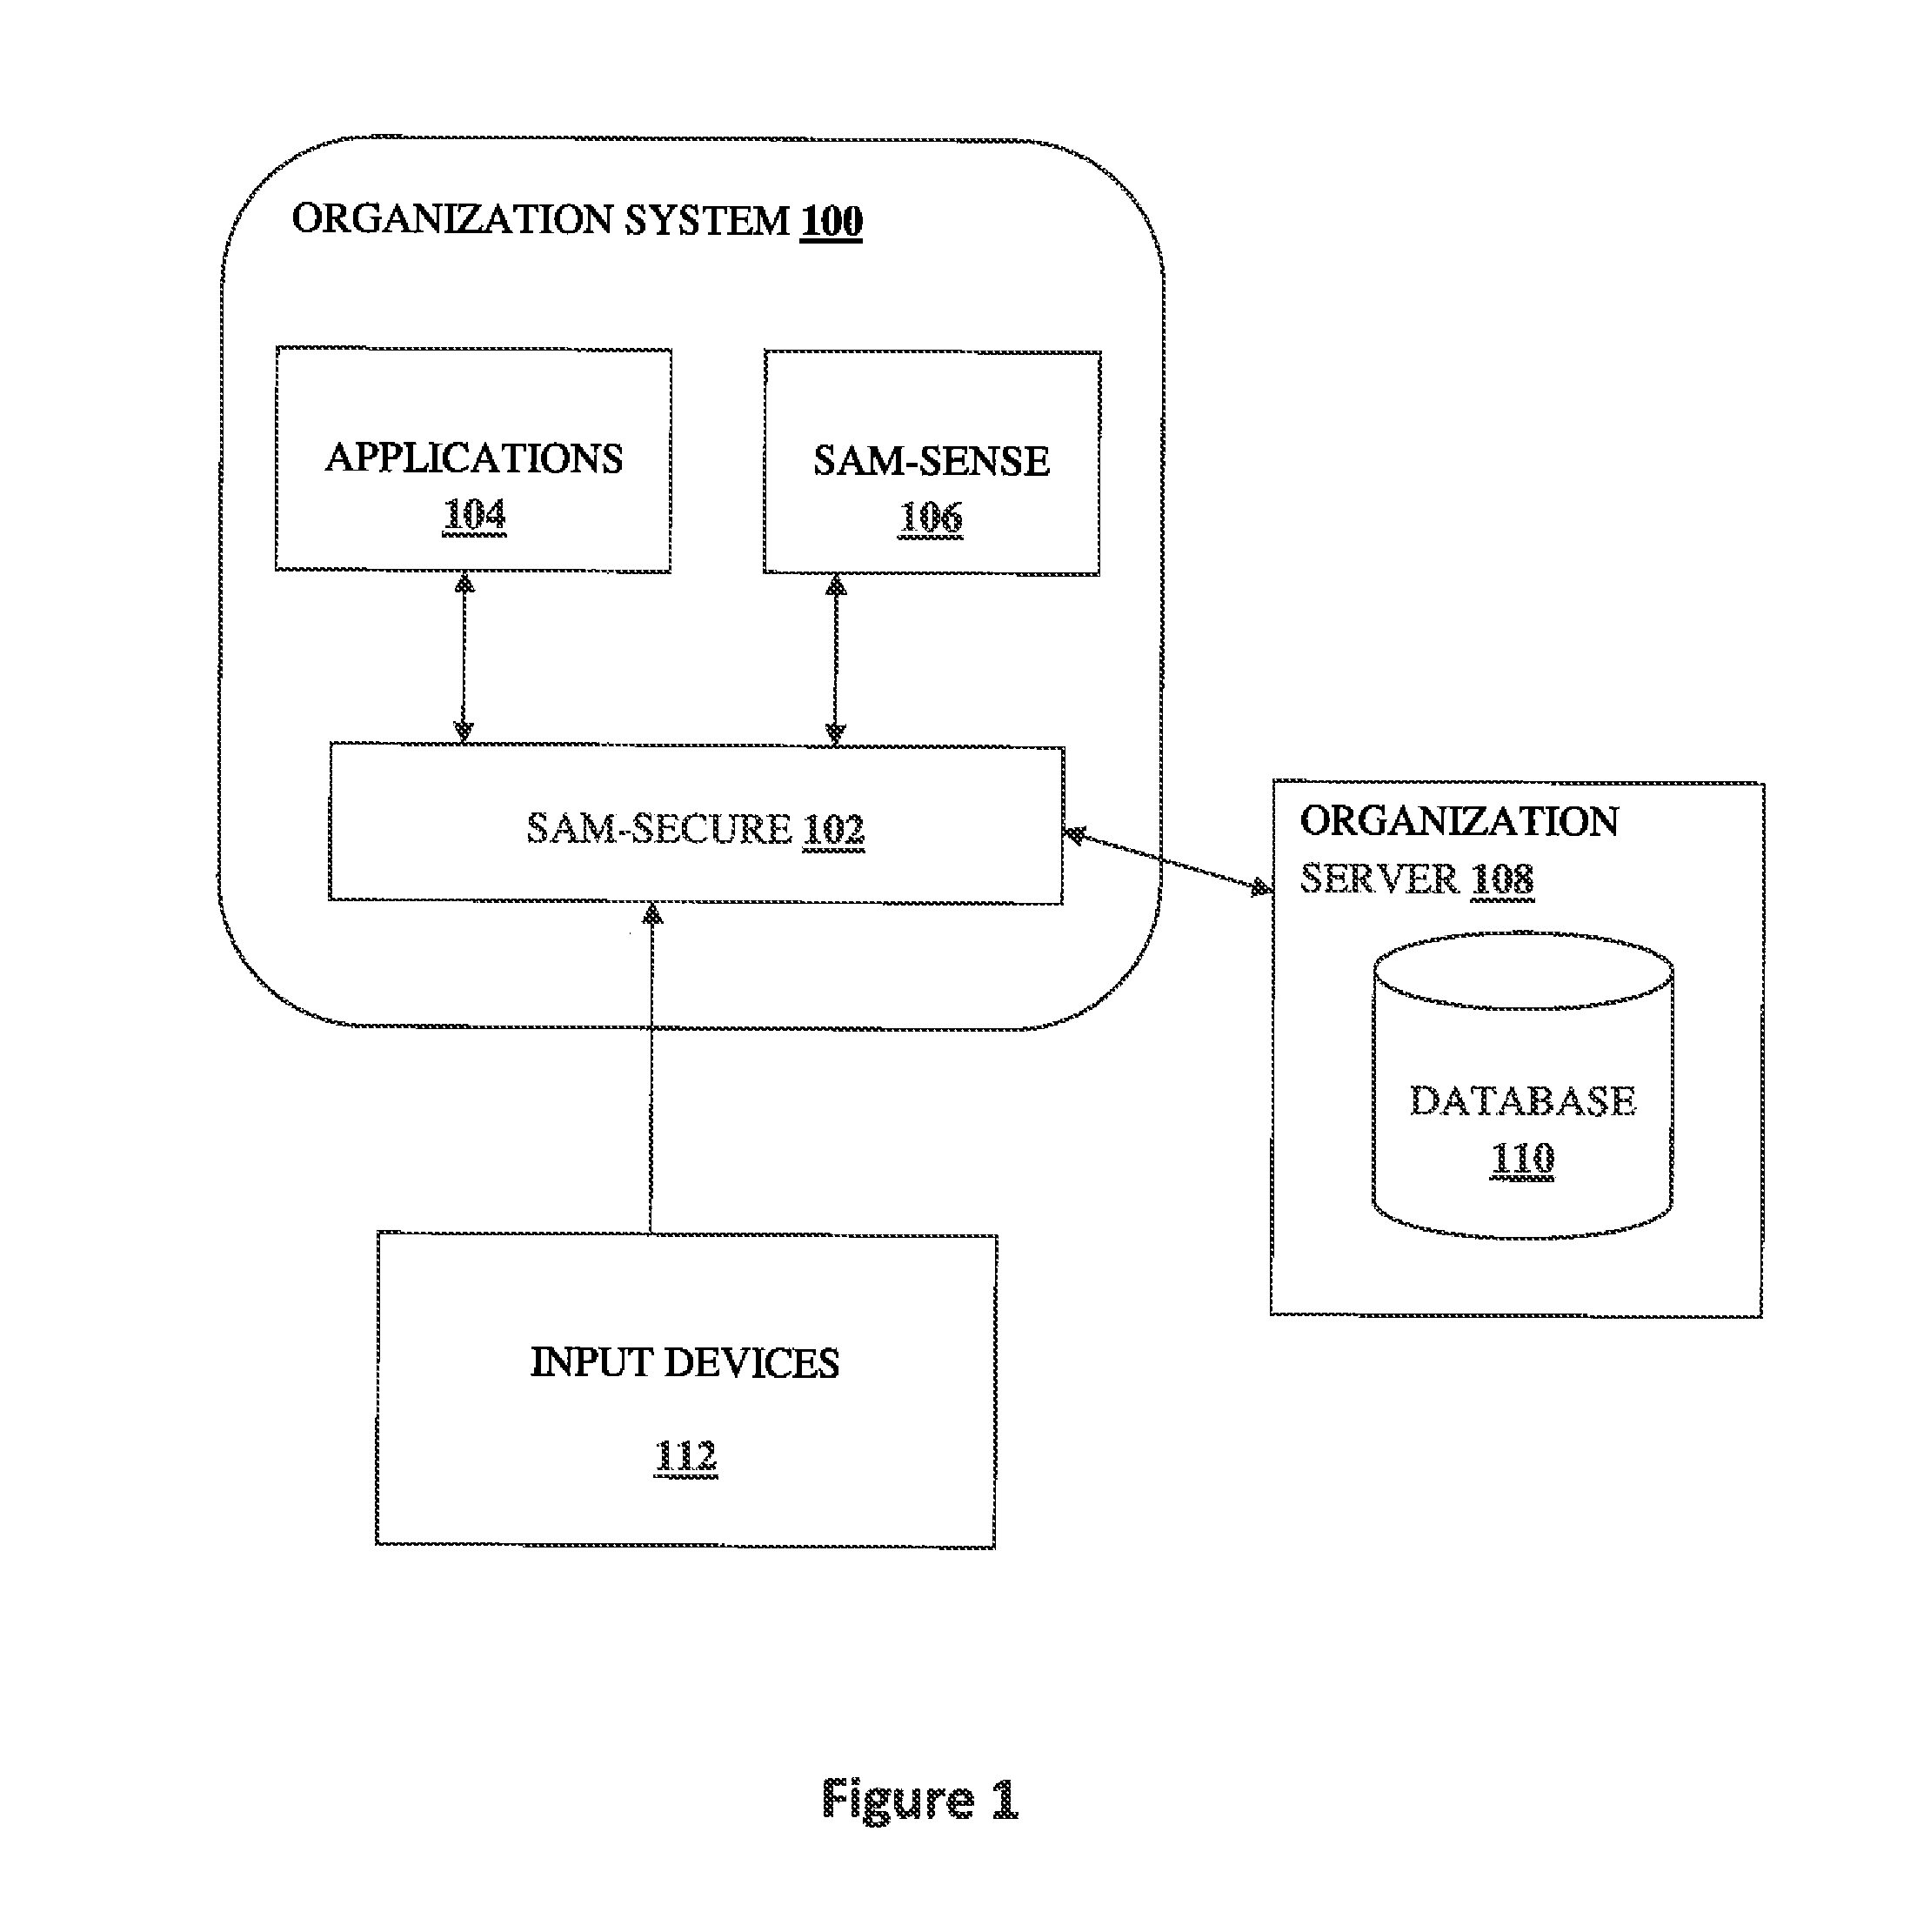 System and method for providing a secure access in an organization system